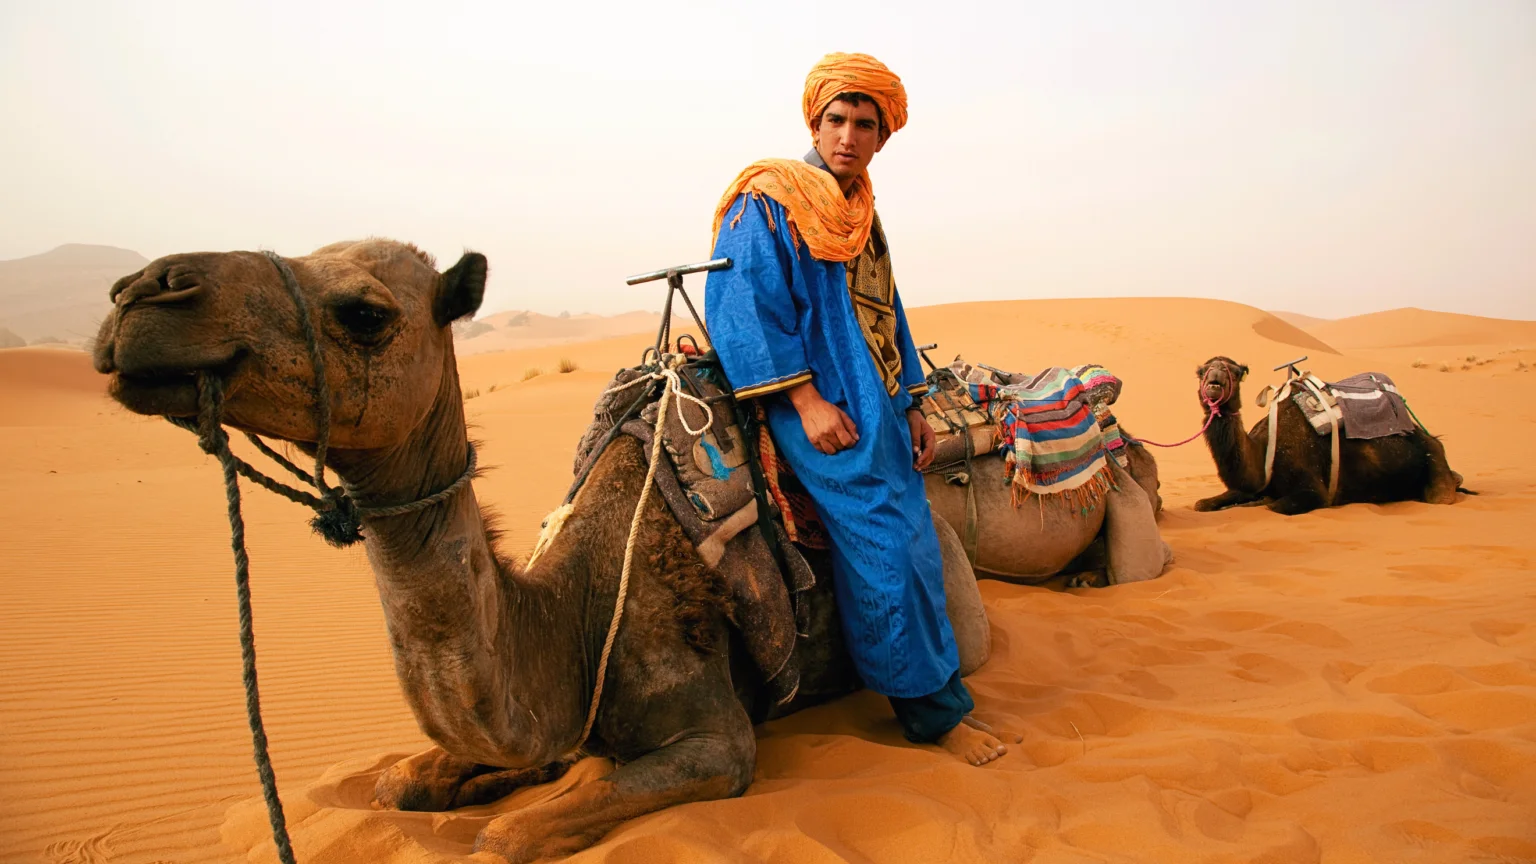 What to expect in 3-day tour from Marrakech to Merzouga